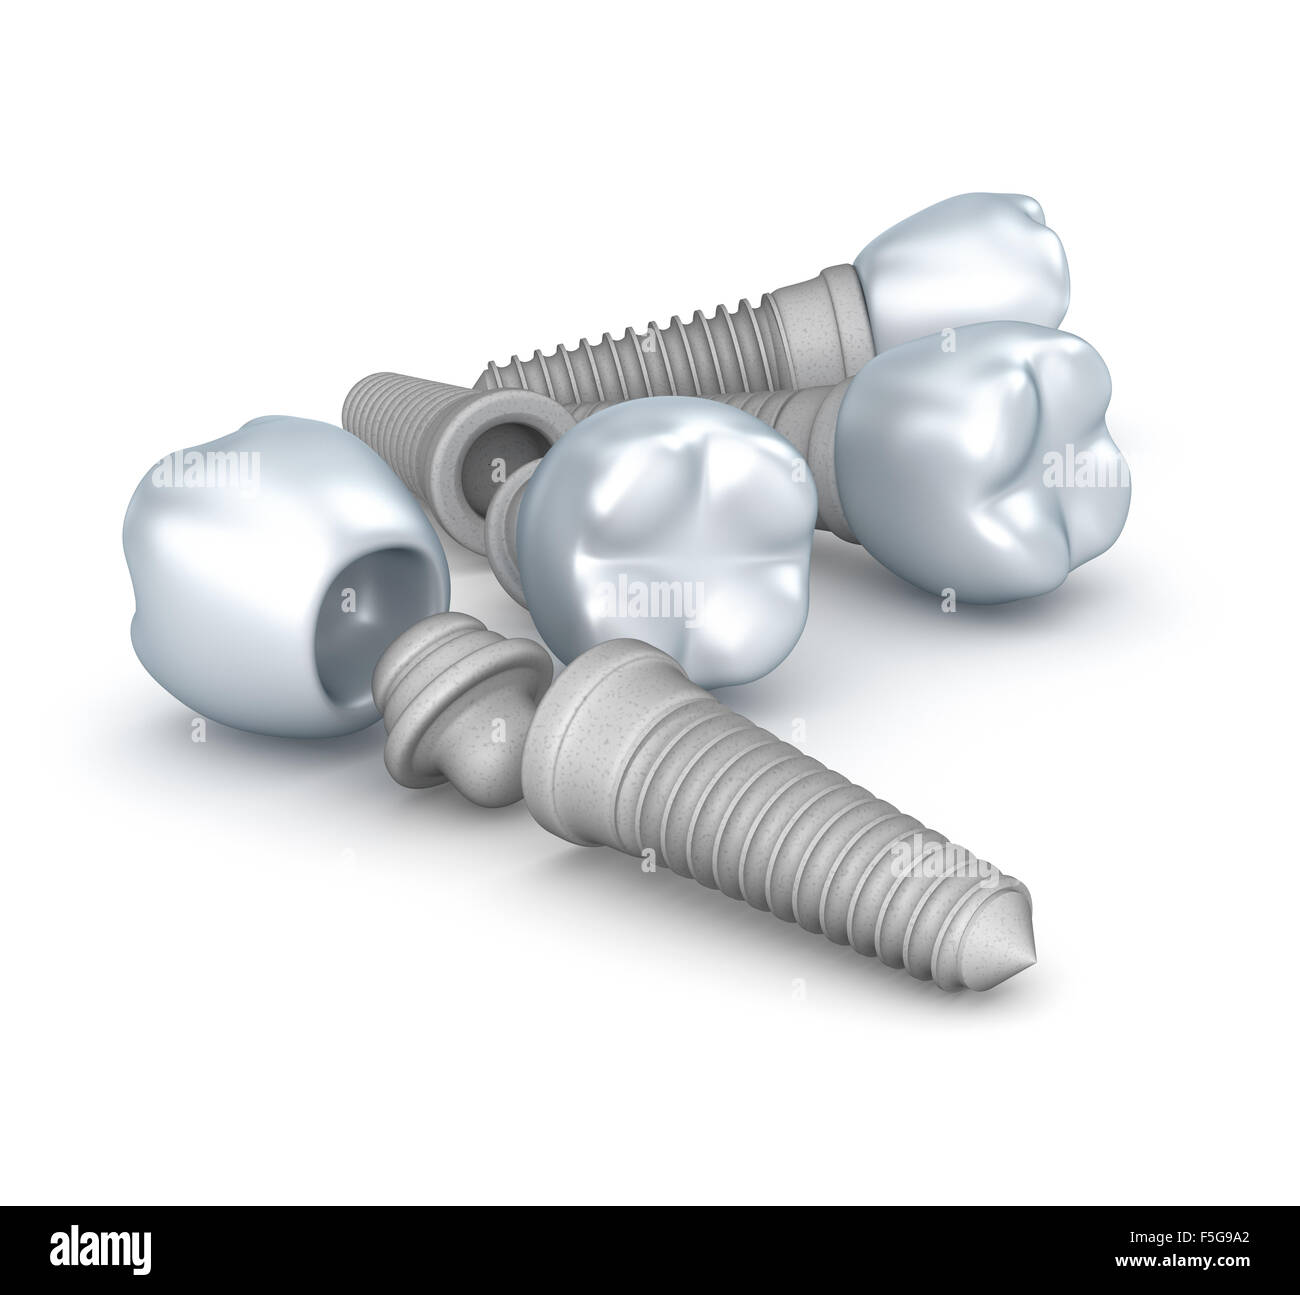 Dental implants, crowns and pins isolated on white Stock Photo